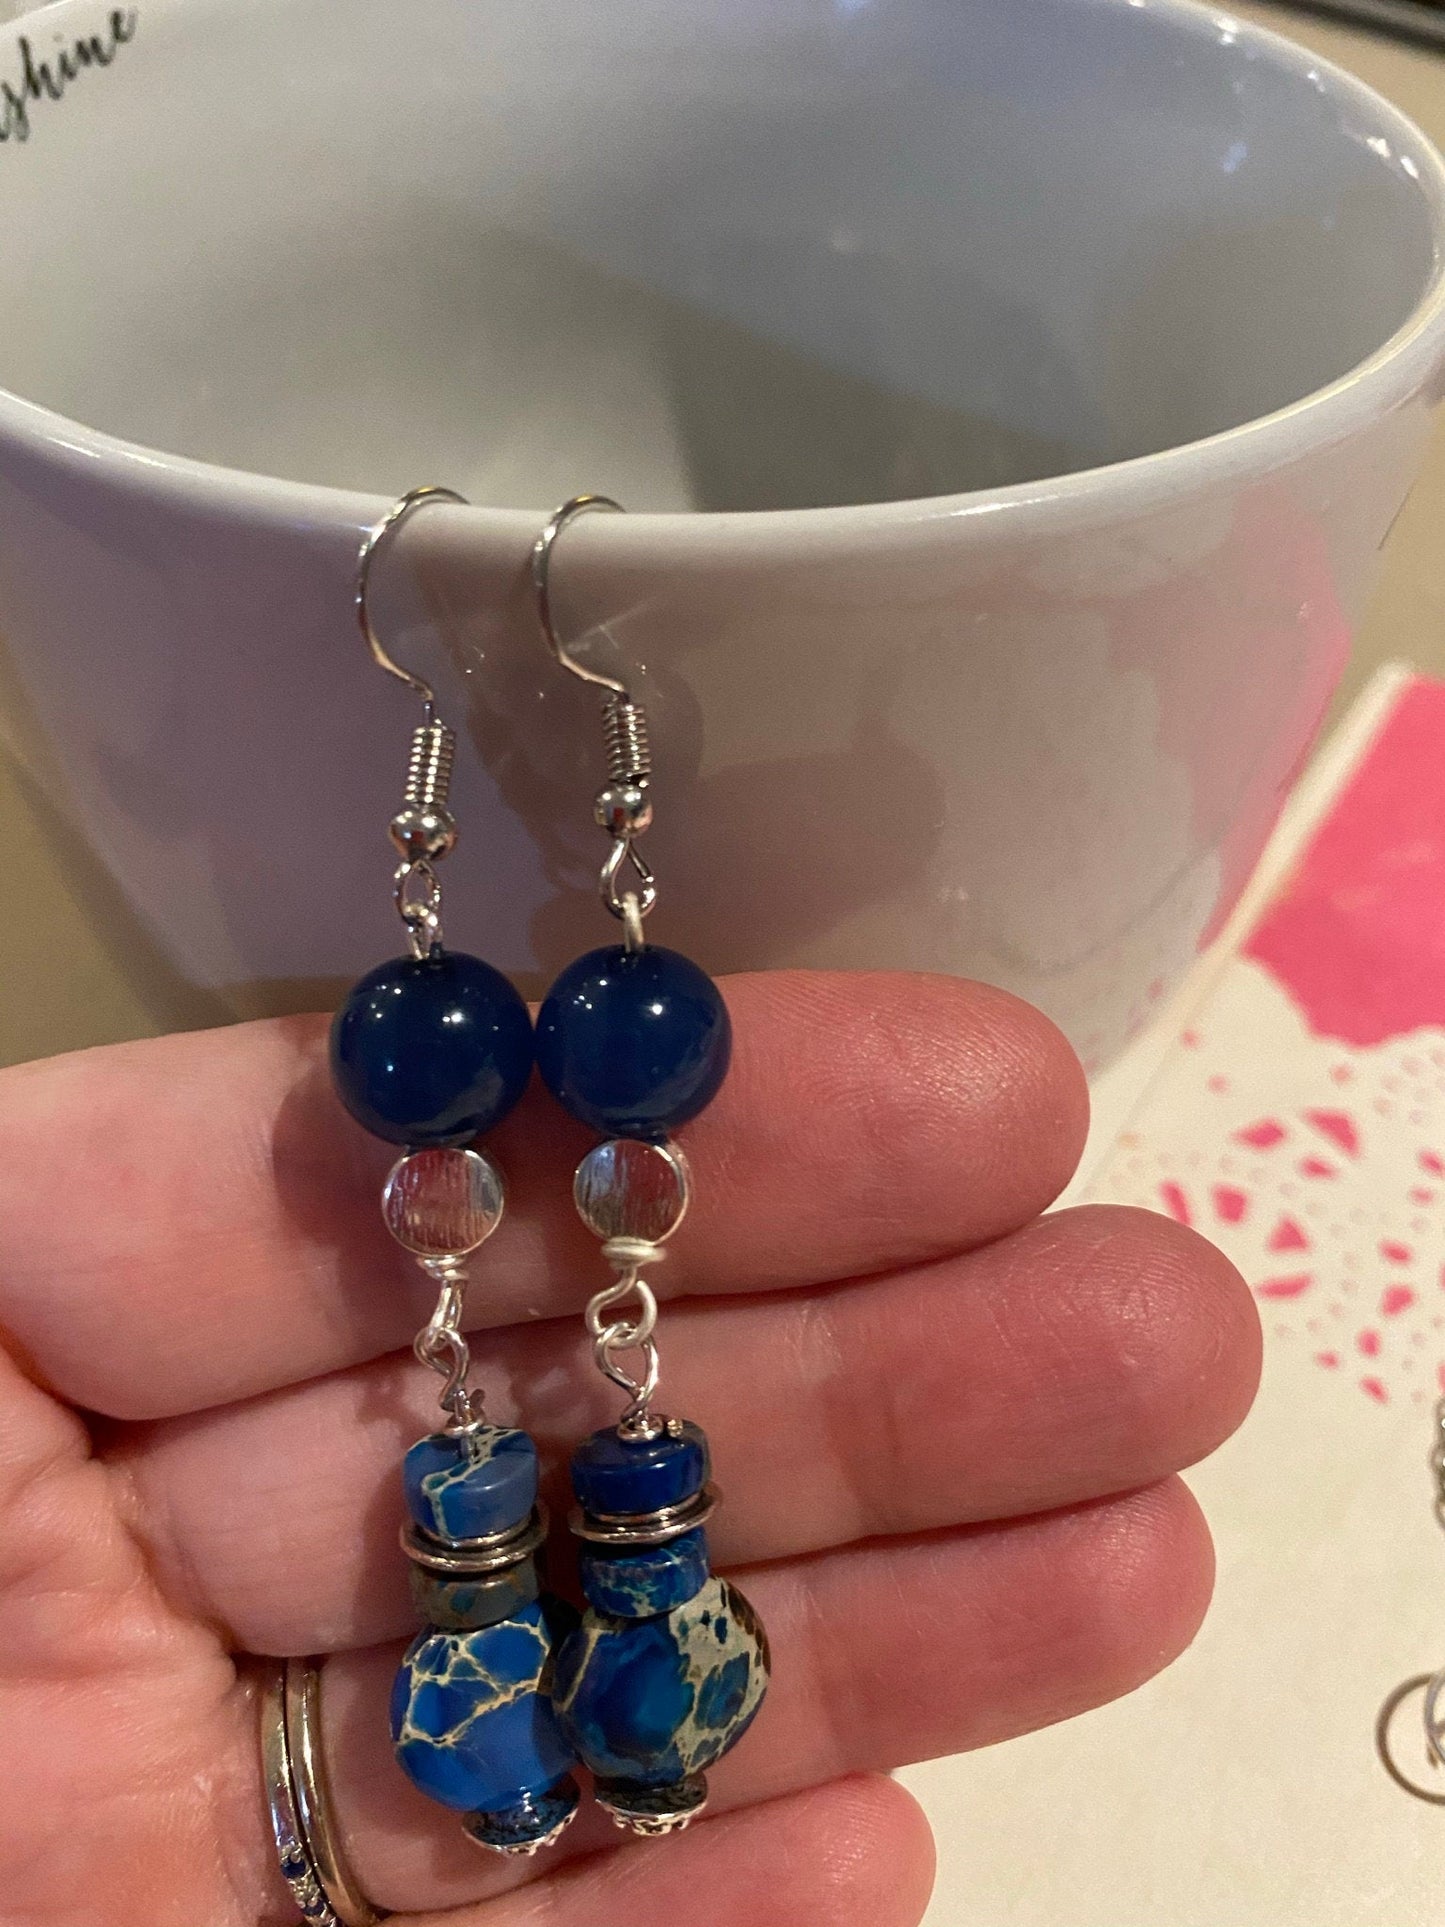 Blue Beaded Boho Earrings with Stacked Round Beads